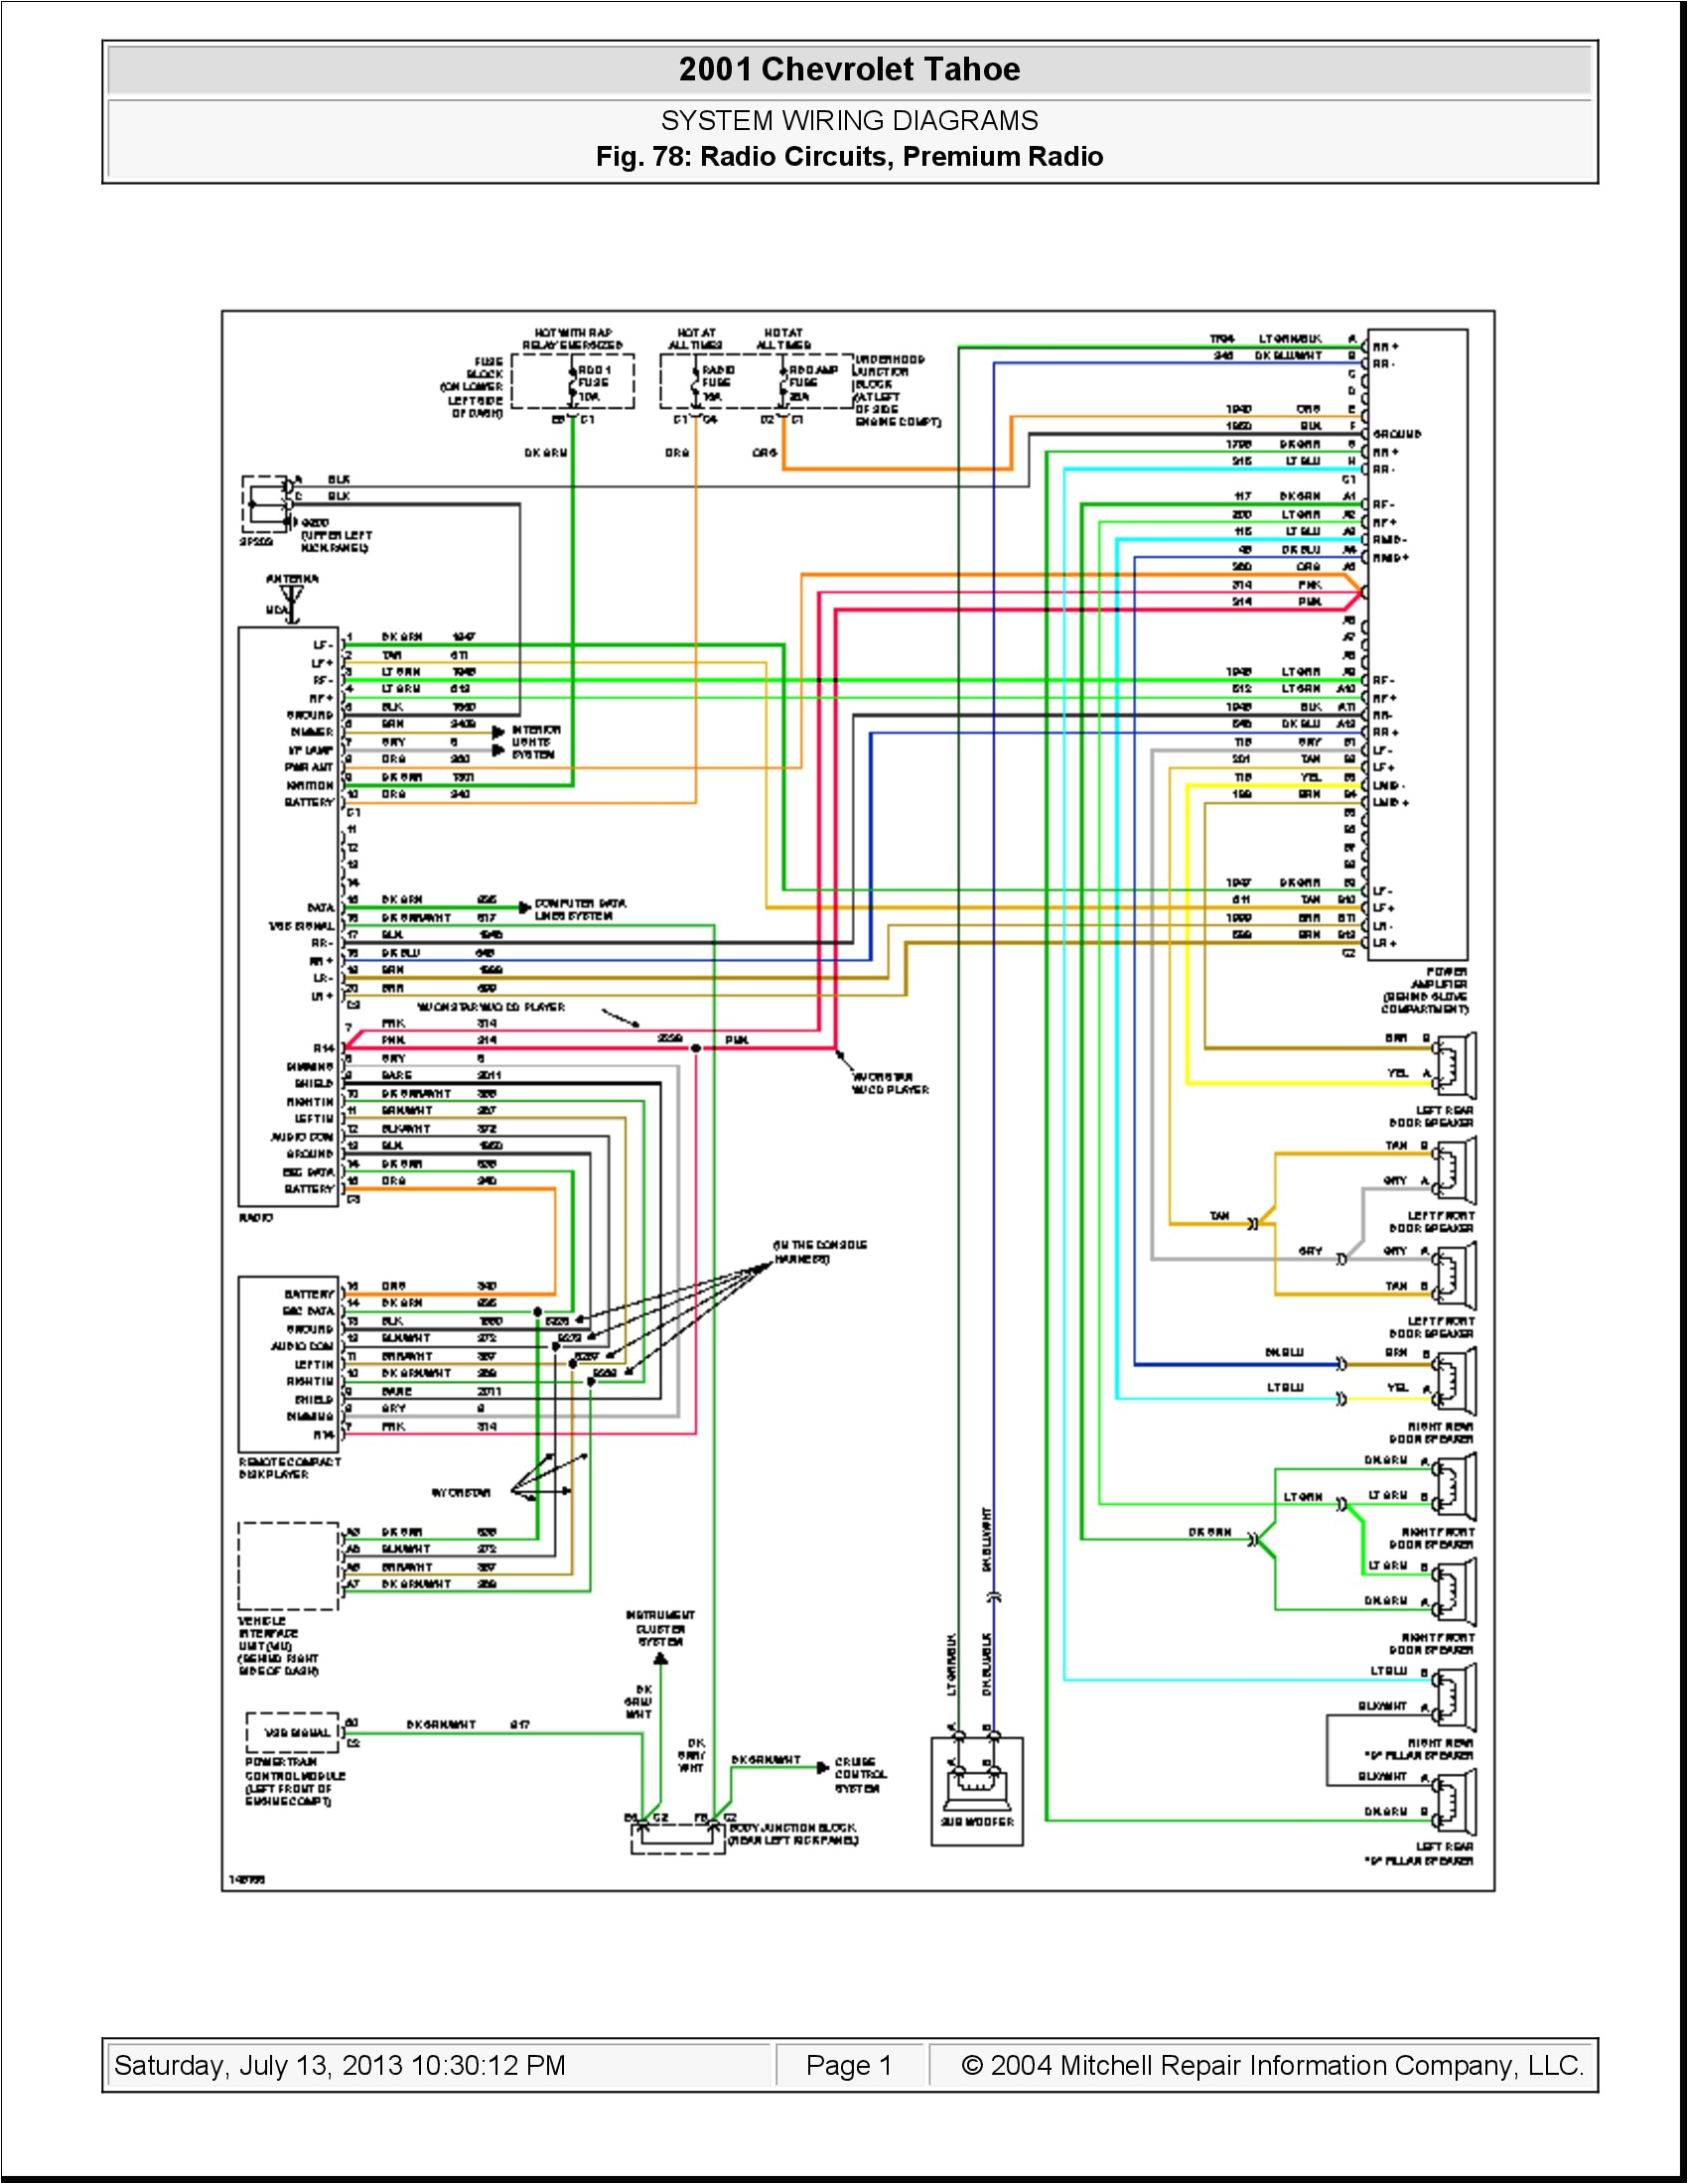 2008 impala wiring diagram for heater wiring diagram paperwrg 7265 08 chevy aveo wiring 2008